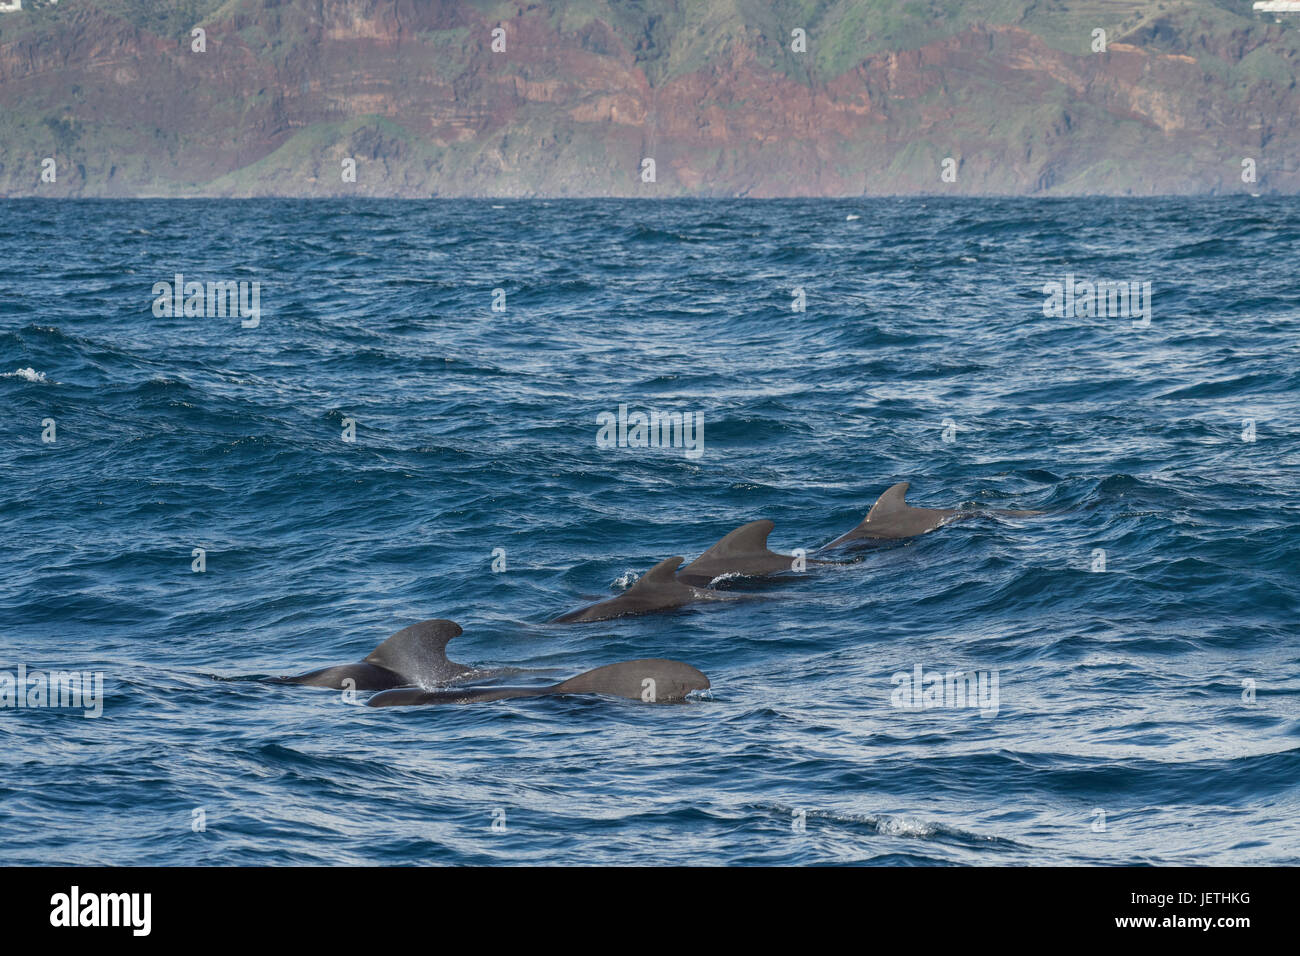 Short-finned pilot whale group, Globicephala macrorhynchus, surfacing, showing dorsal fin, with Island of Madeira in background, North Atlantic Ocean Stock Photo